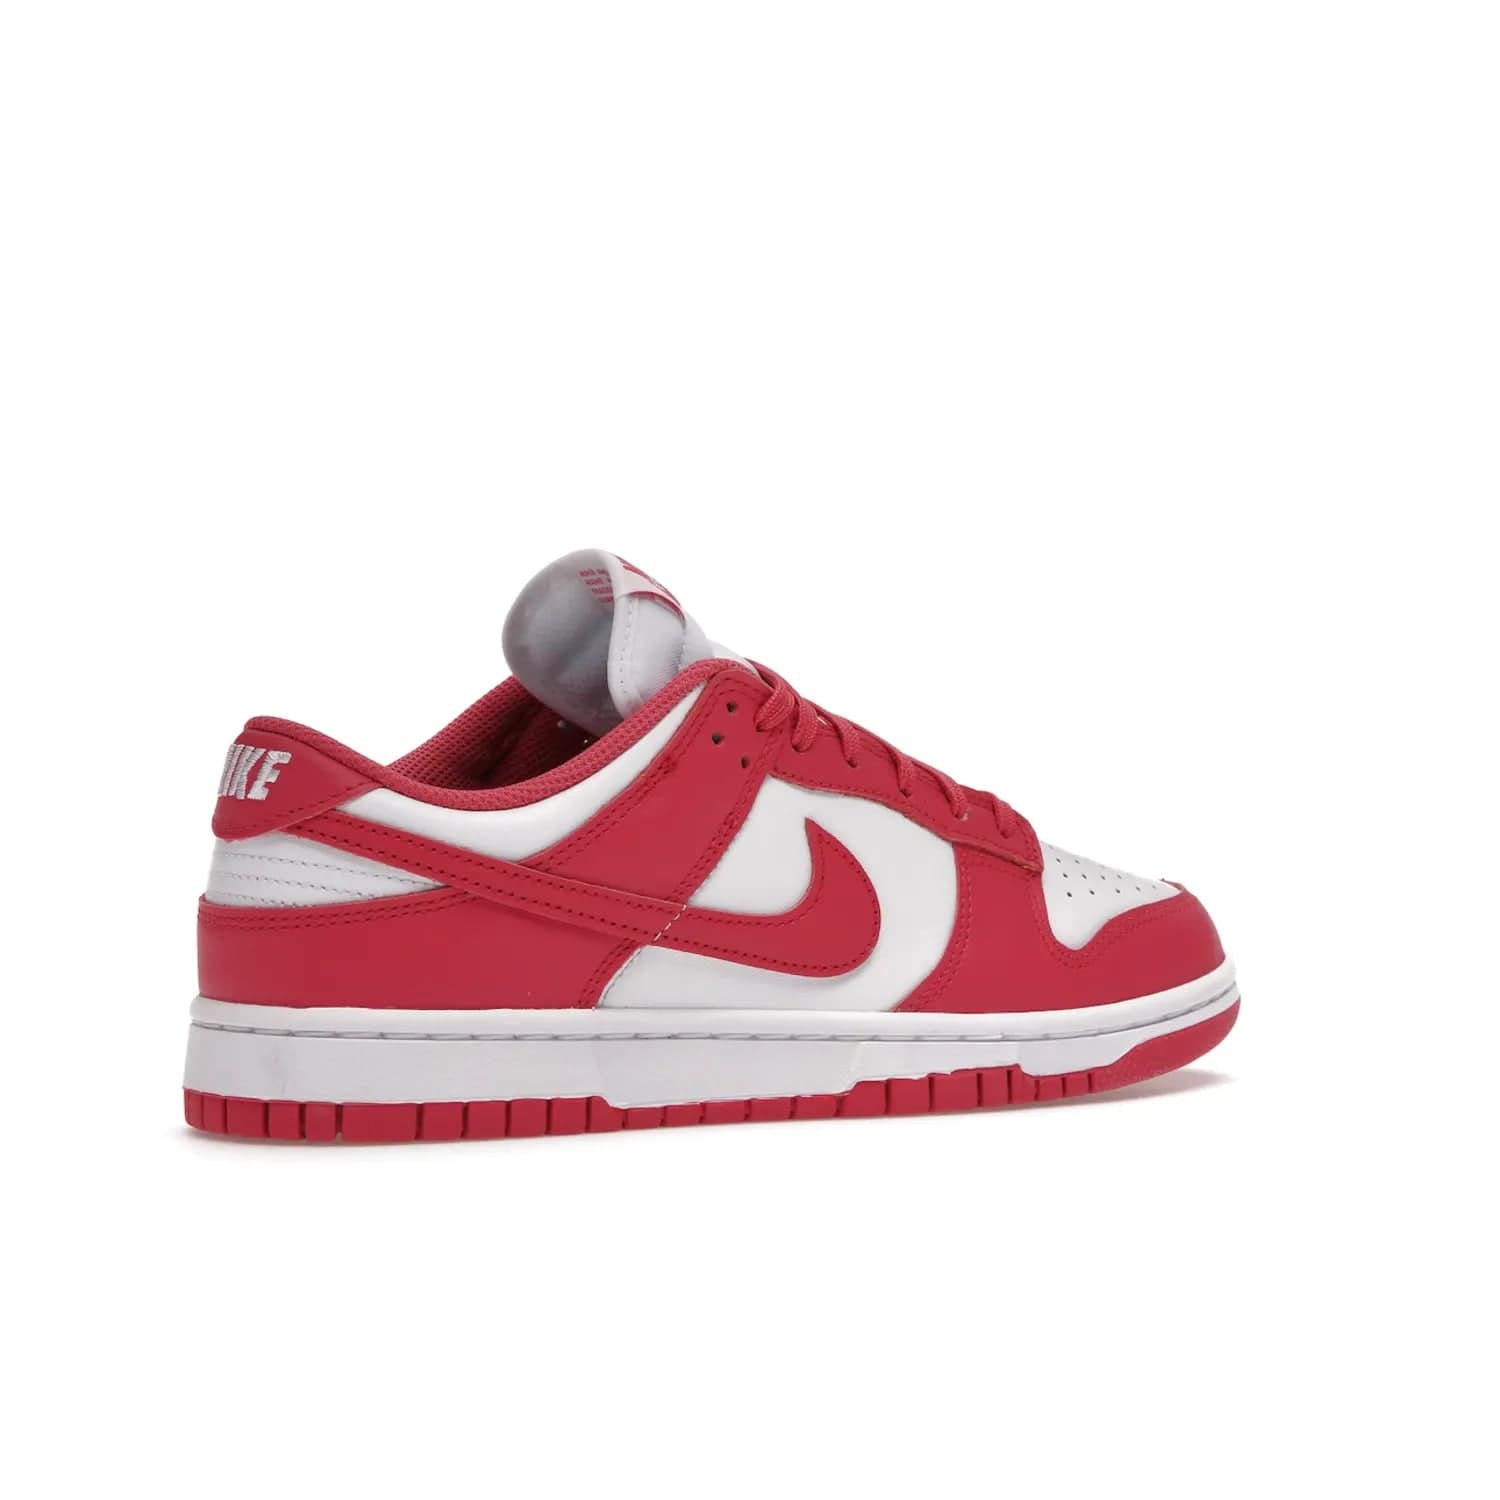 Nike Dunk Low Archeo Pink (Women's) - Image 34 - Only at www.BallersClubKickz.com - Introducing the stylish and comfortable Nike Dunk Low Archeo Pink (Women's). White/Archeo Pink colorway with white leather upper, pink overlays and Swooshes. Get yours now!